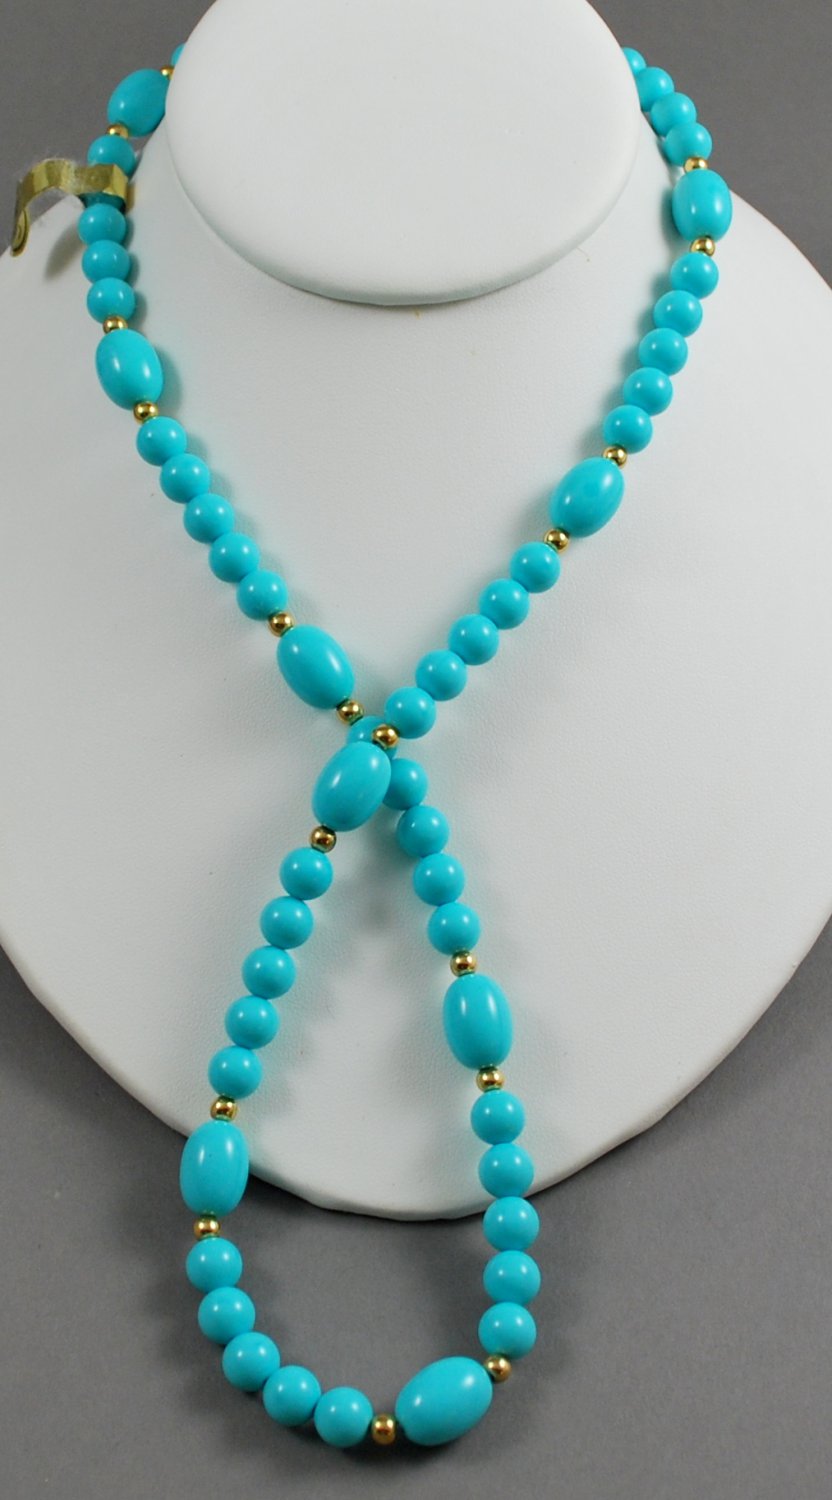 1983 Avon Turquoise Impressions Plastic Bead Necklace w/ Gold Tone Spacers